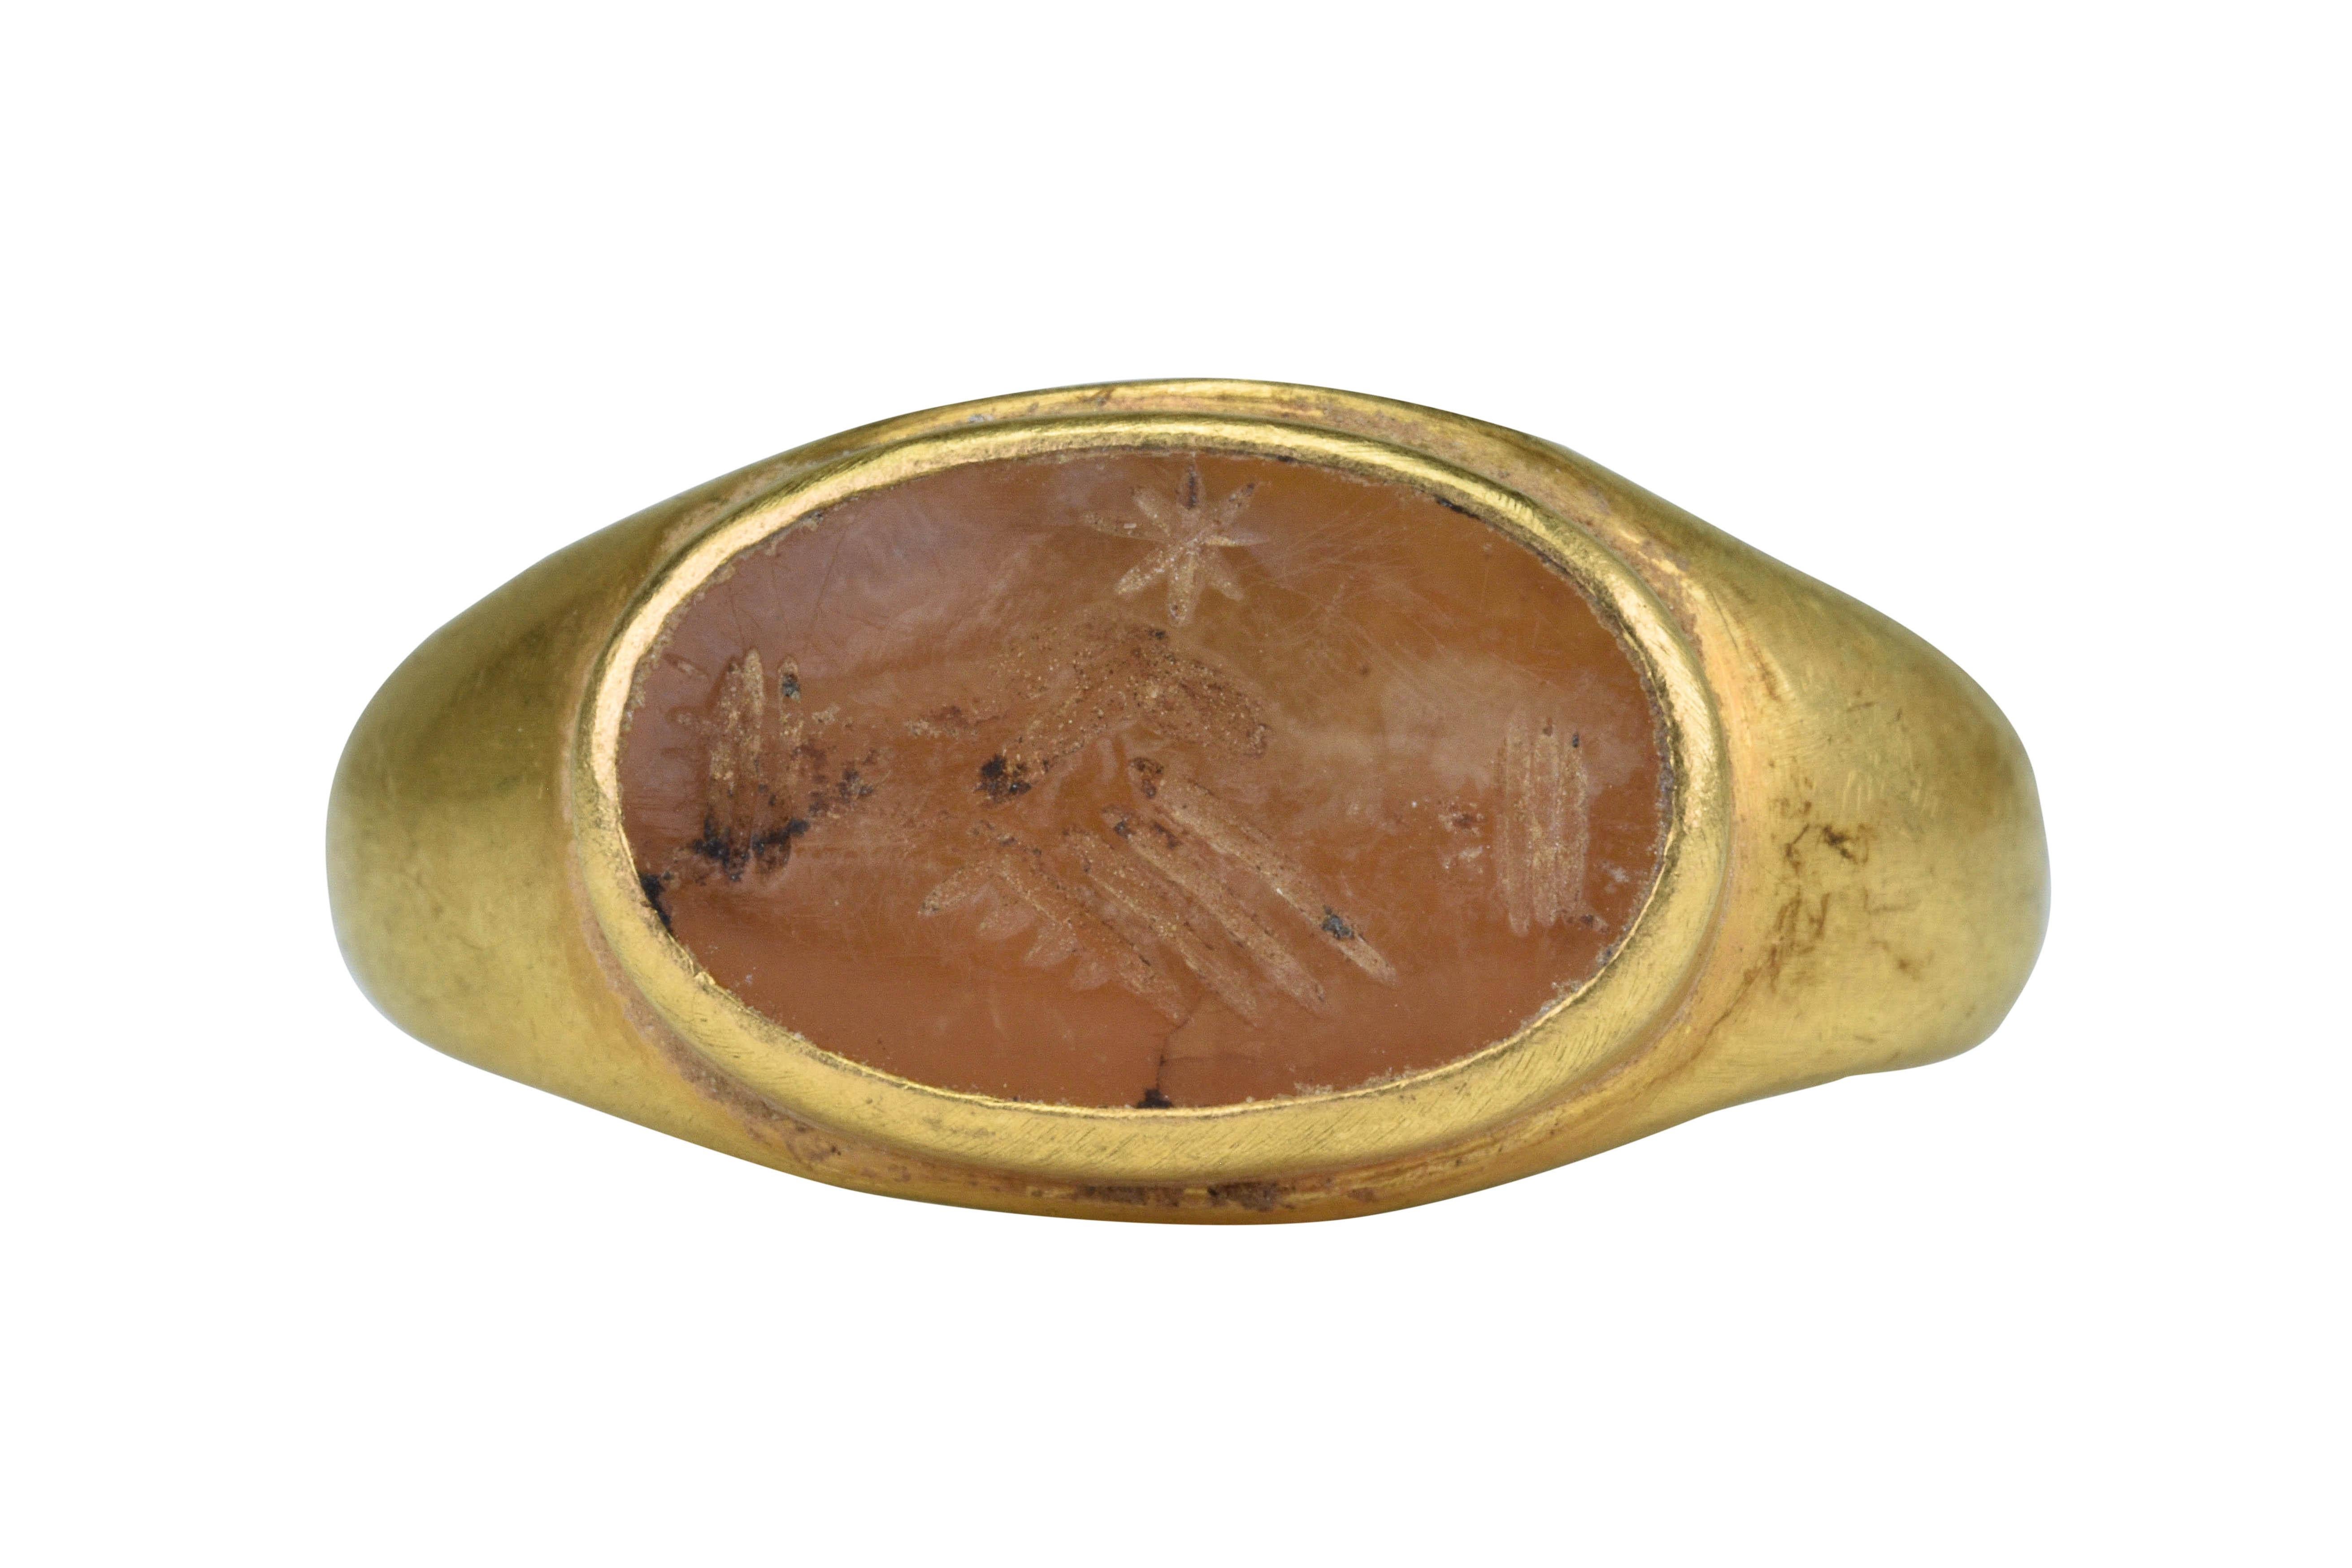 Classical Roman Ancient Roman Gold Intaglio Signet Ring with Clasped Hands